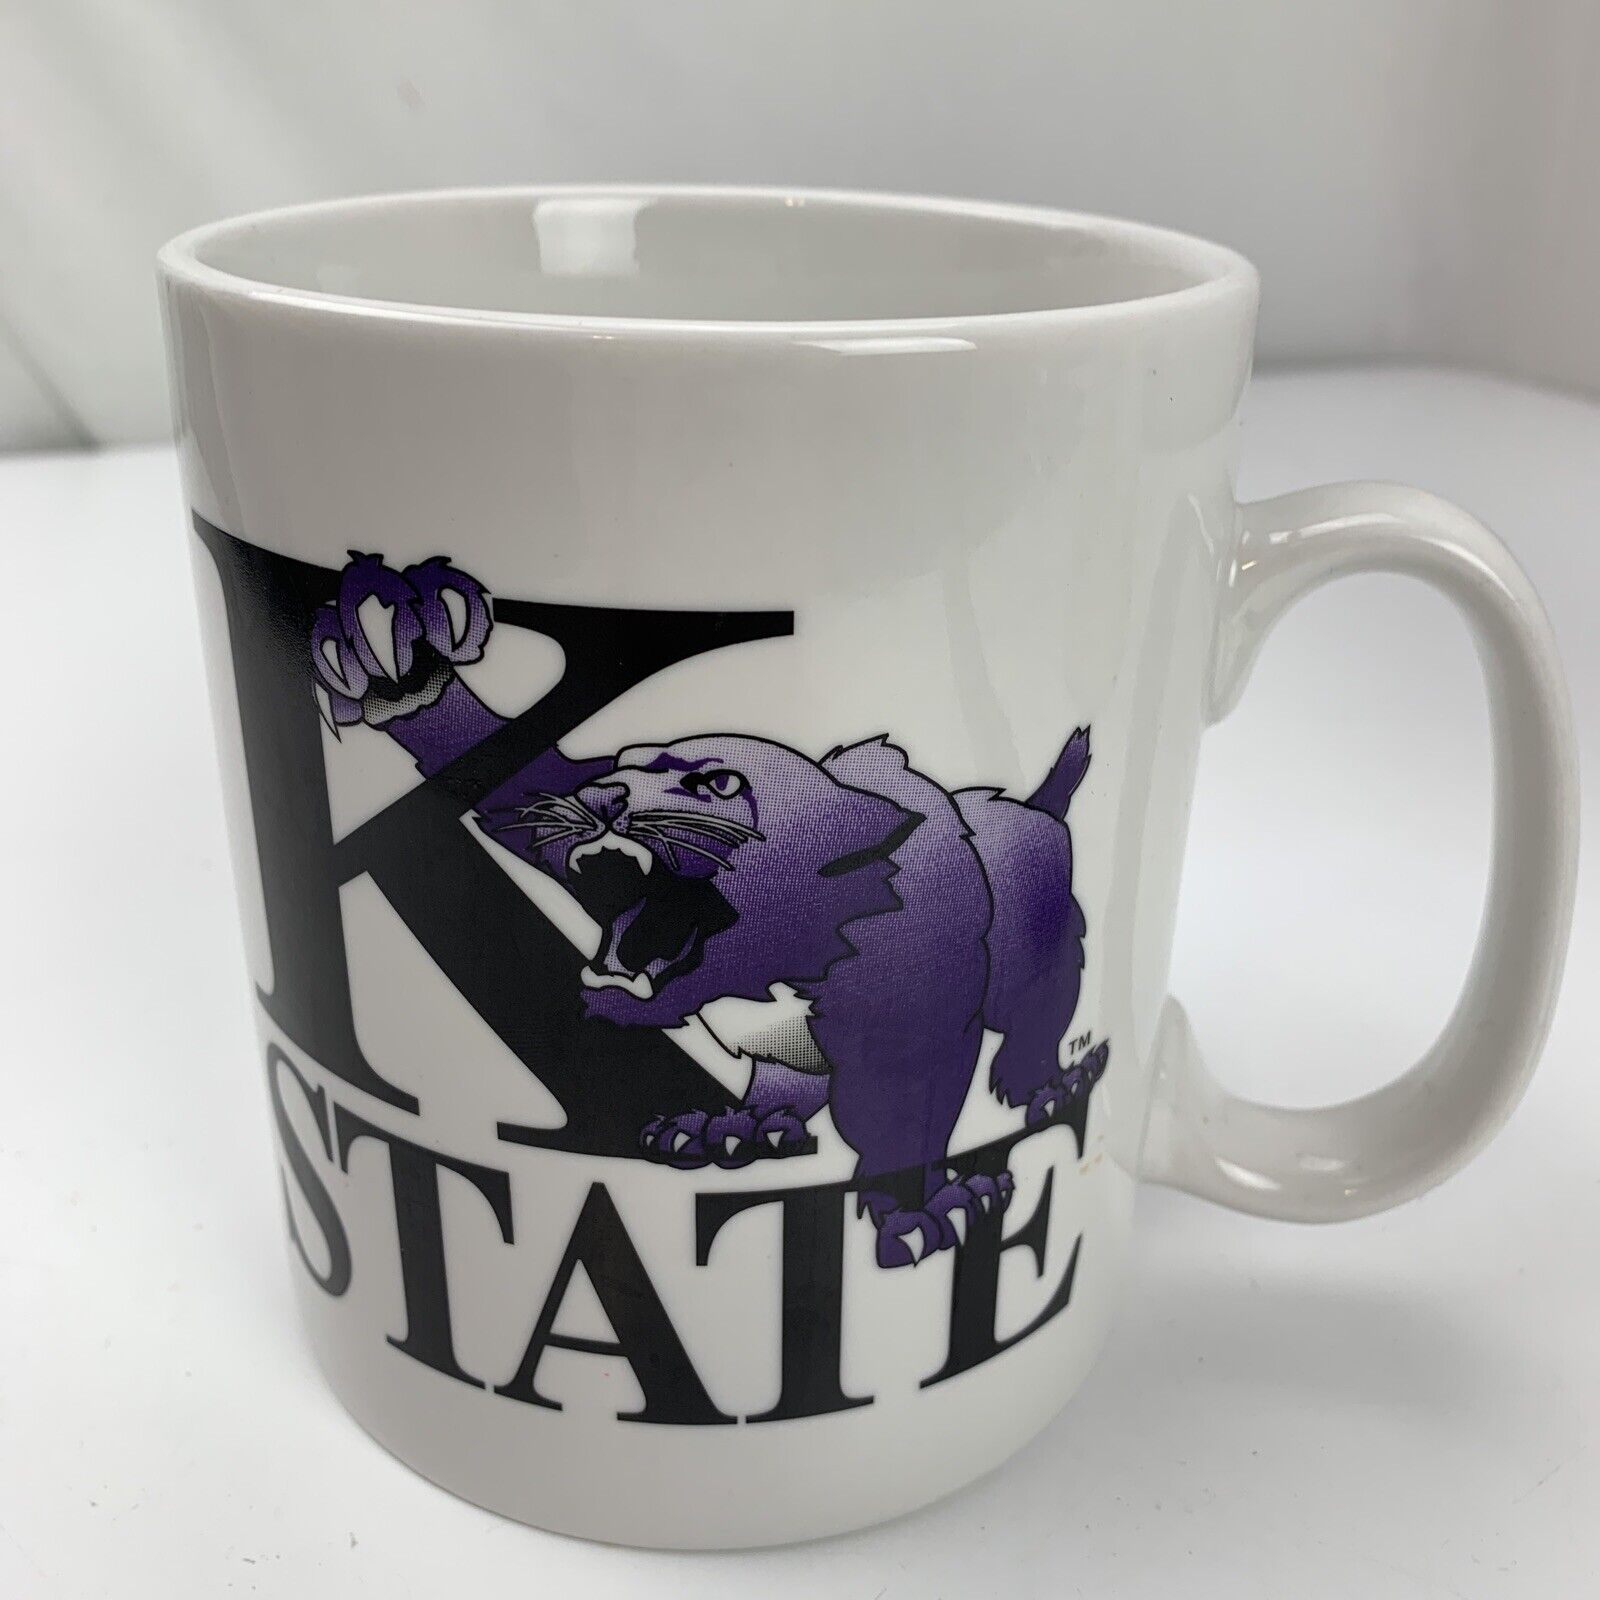 K-State Wildcats Large Oversized Coffee Mug Cup